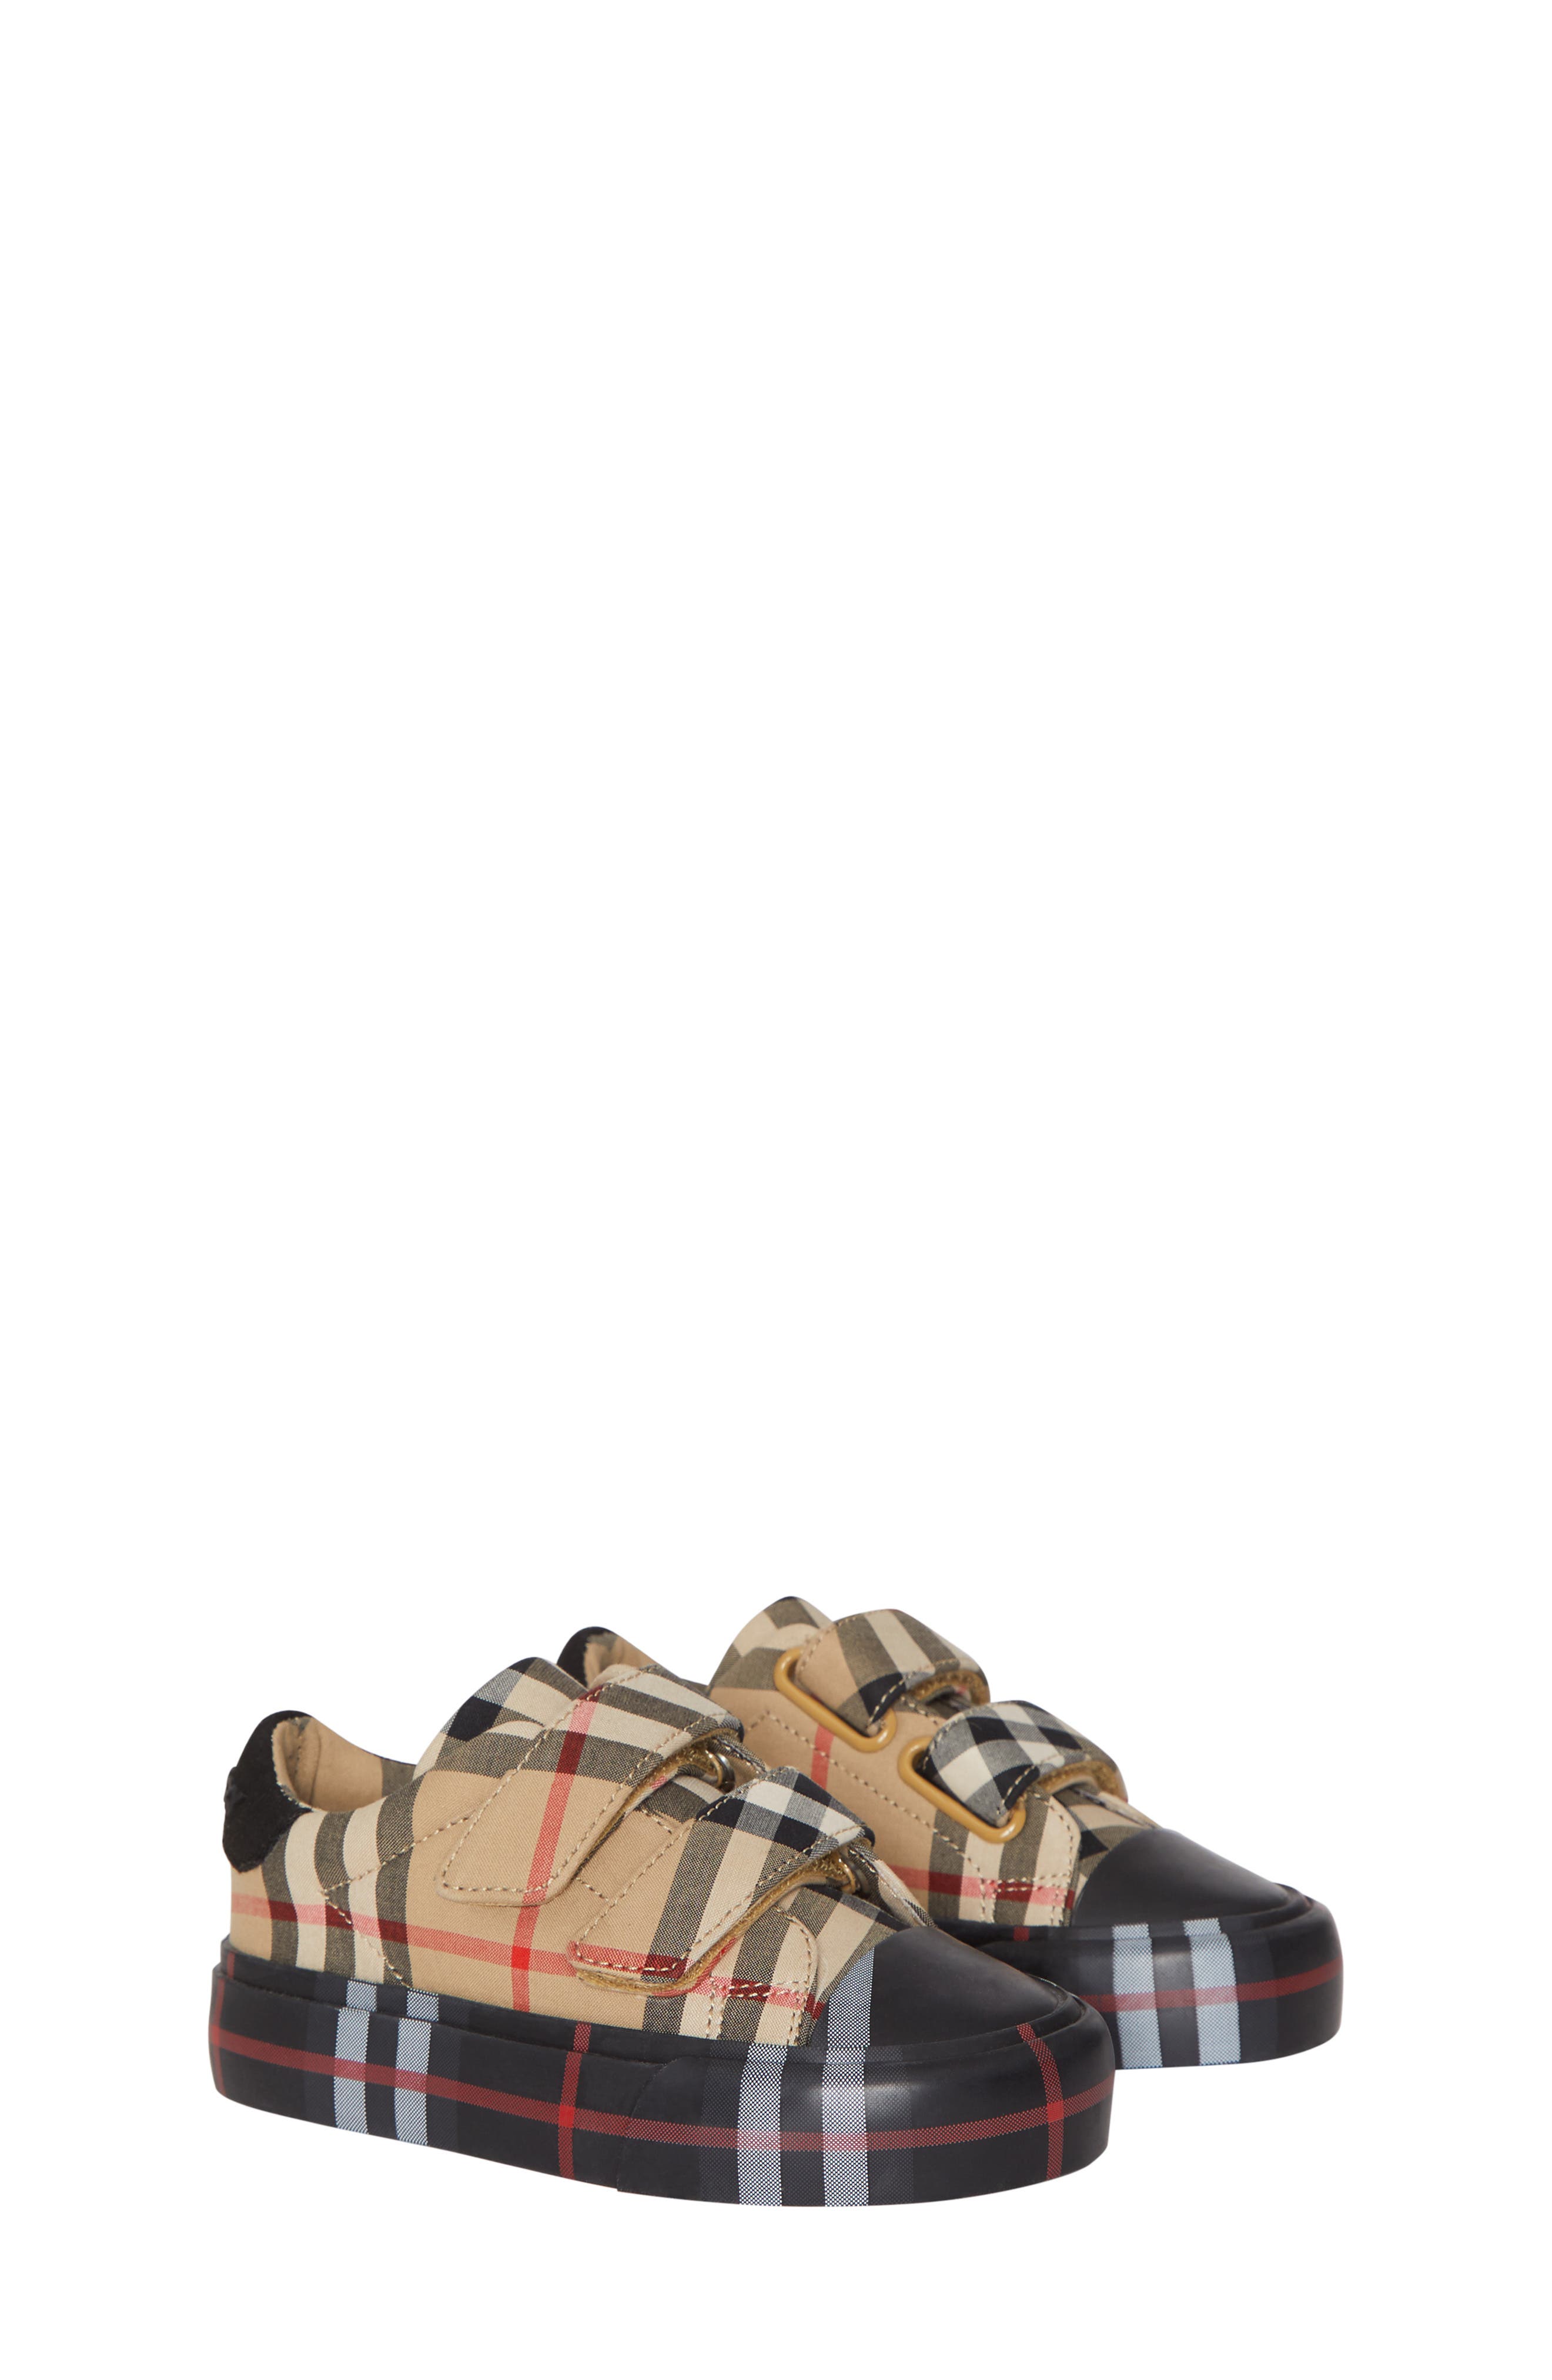 burberry infant shoes on sale